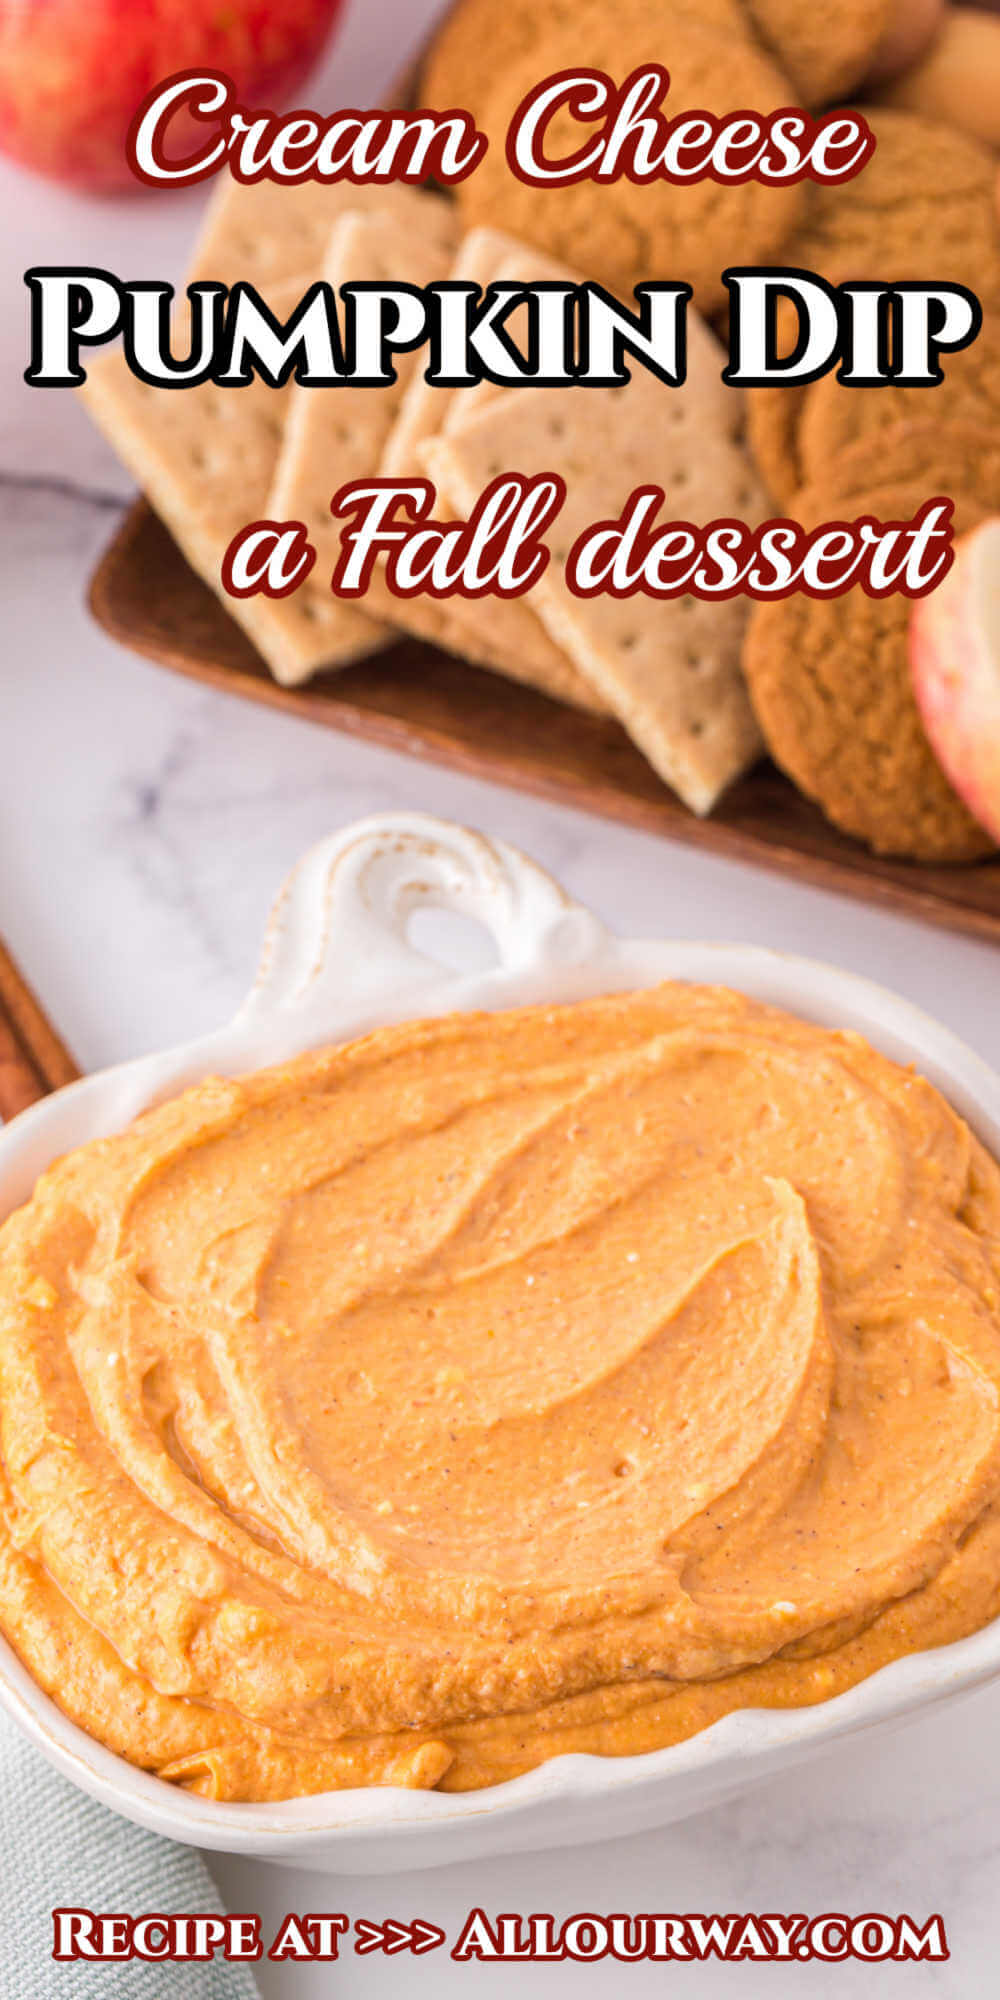 Enjoy this sweet and creamy Pumpkin Dip with cream cheese for Thanksgiving or as a Fall-inspired sweet treat. It’s delicious with sliced fruit, wafers, pretzels, and more!